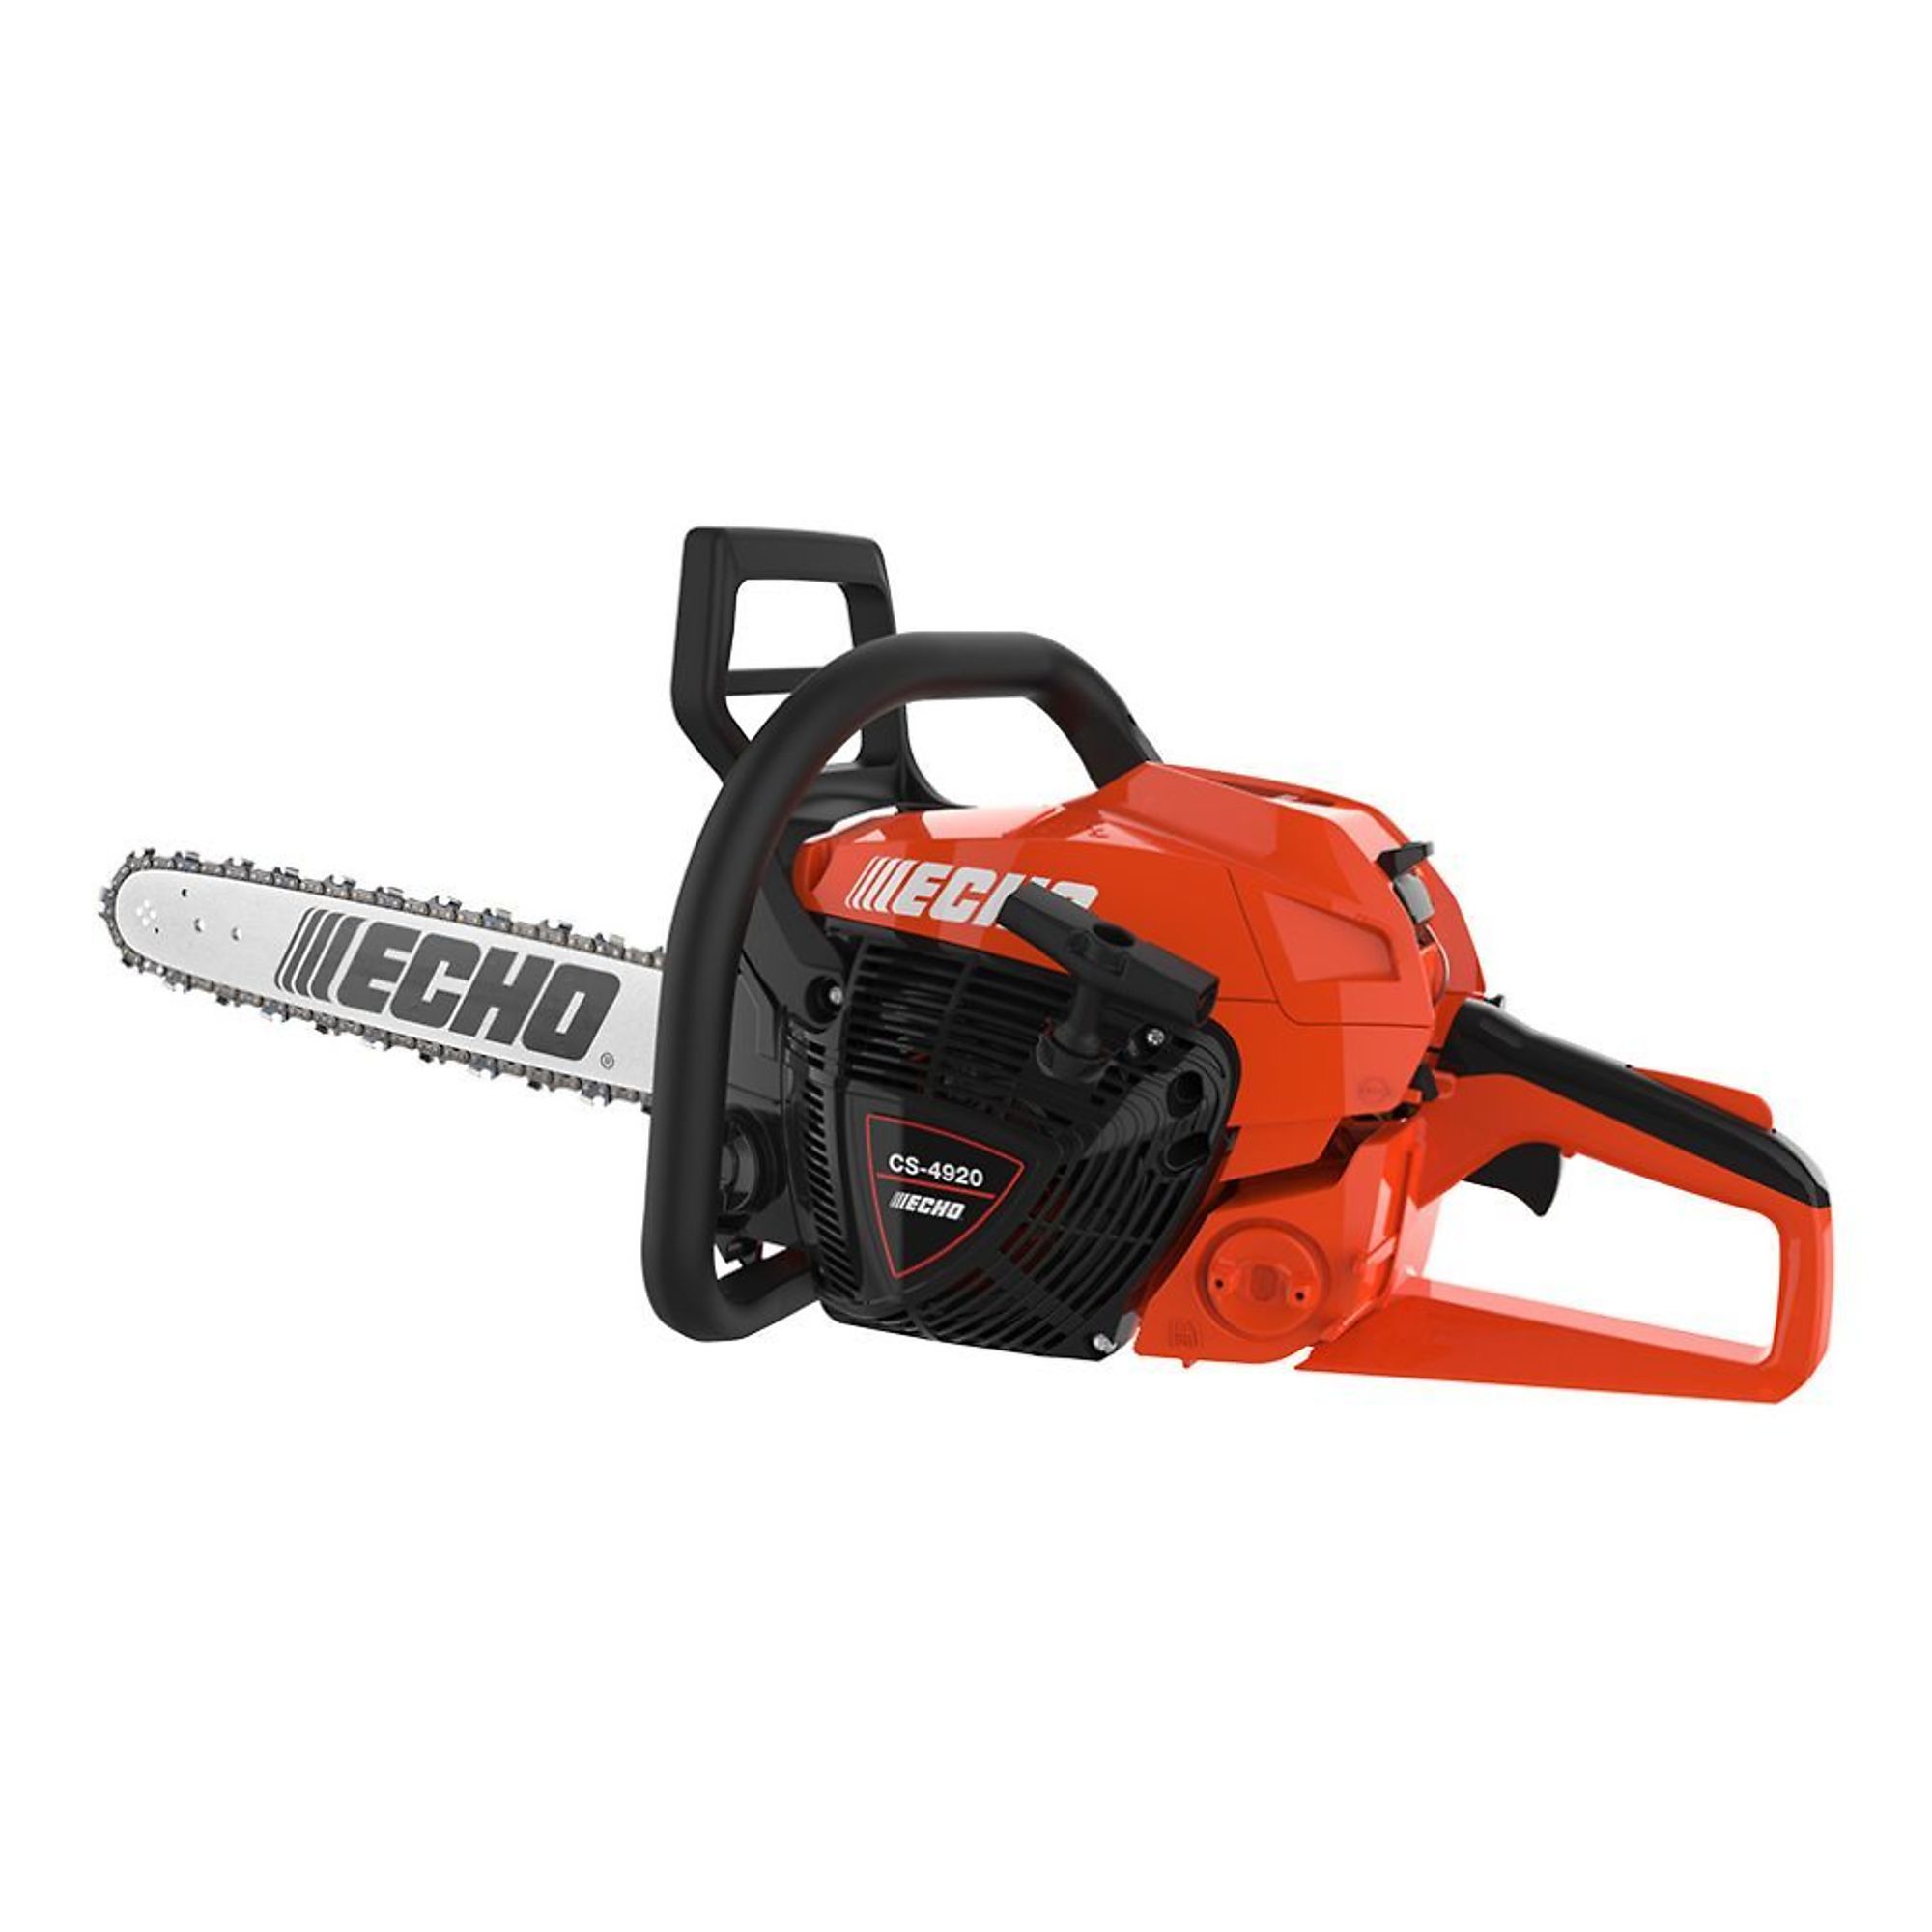 ECHO, Gas-Powered Rear Handle Chainsaw, Bar Length 20 in, Engine Displacement 50.2 cc, Model CS-4920-20